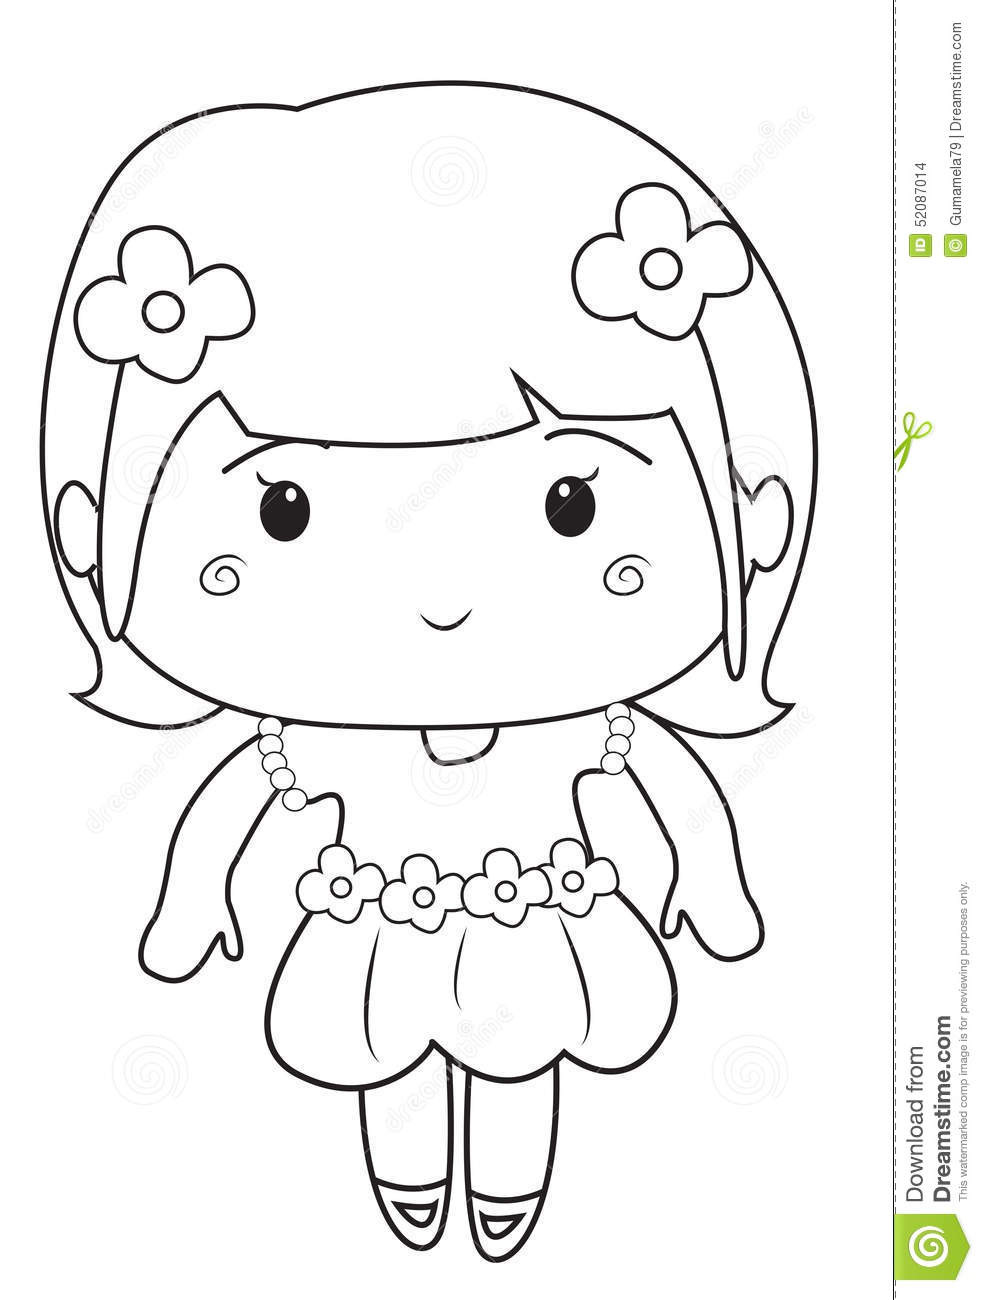 Toddler Girl Coloring Pages
 Little Girl Wearing A Dress Coloring Page Stock